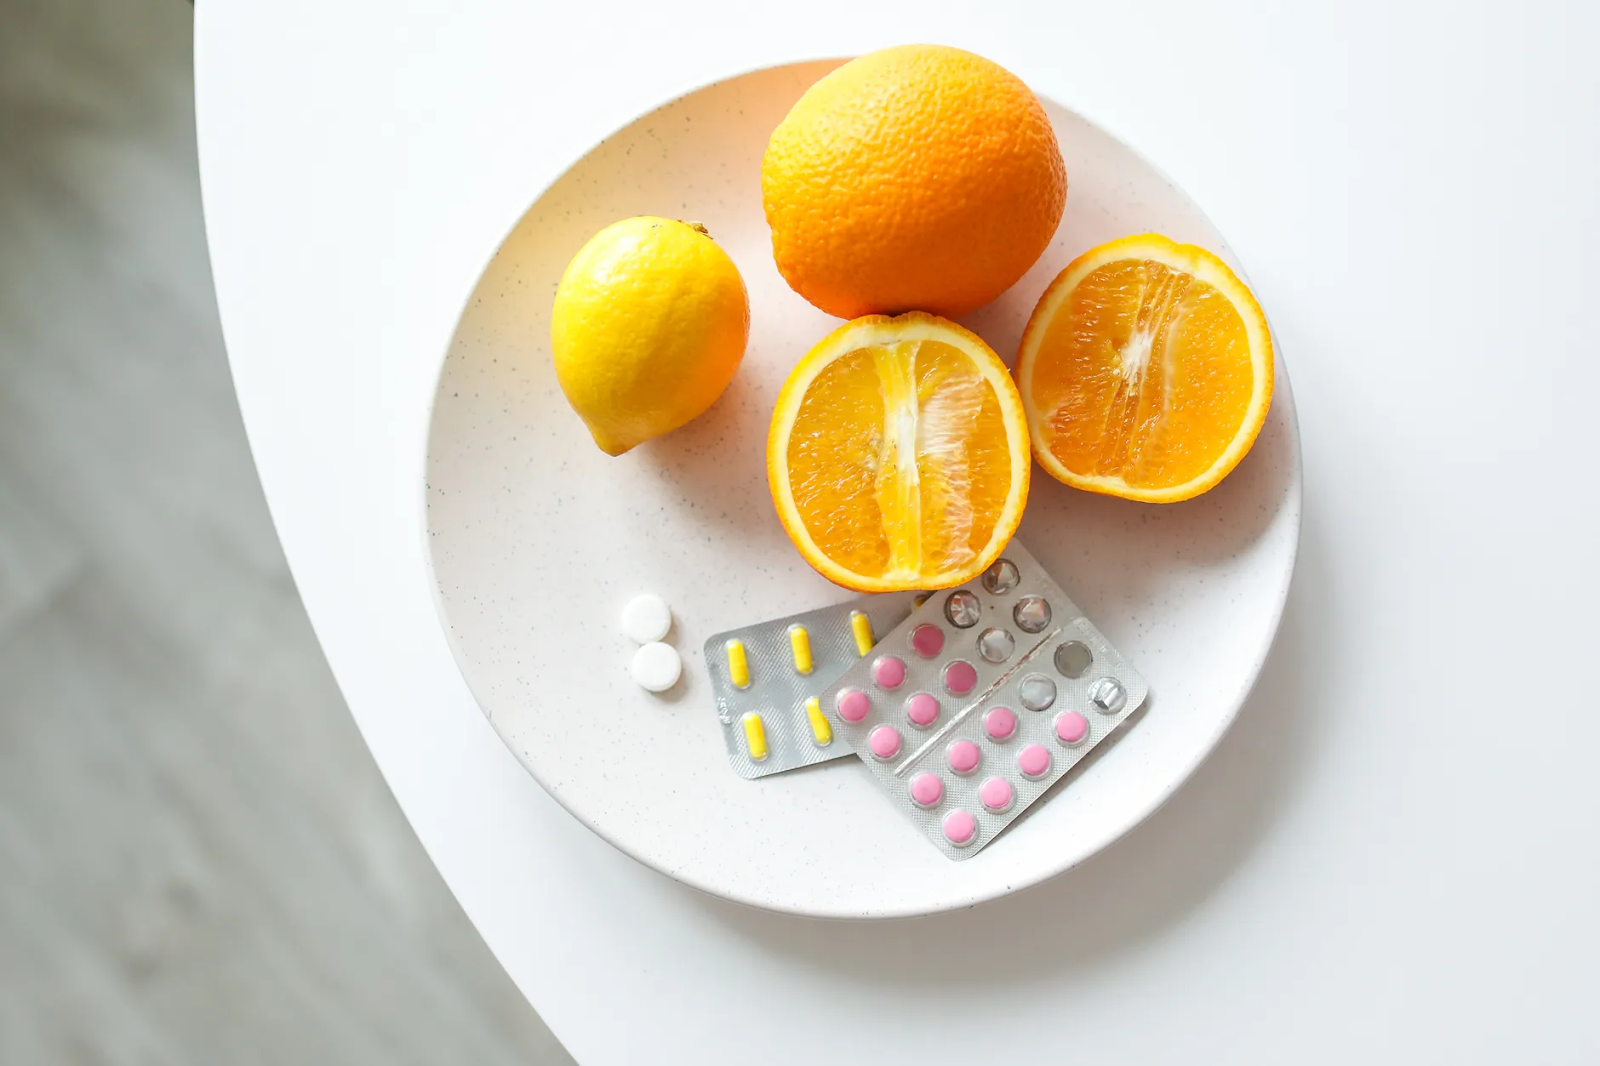 3 Ways Vitamin C is helpful for the immune system